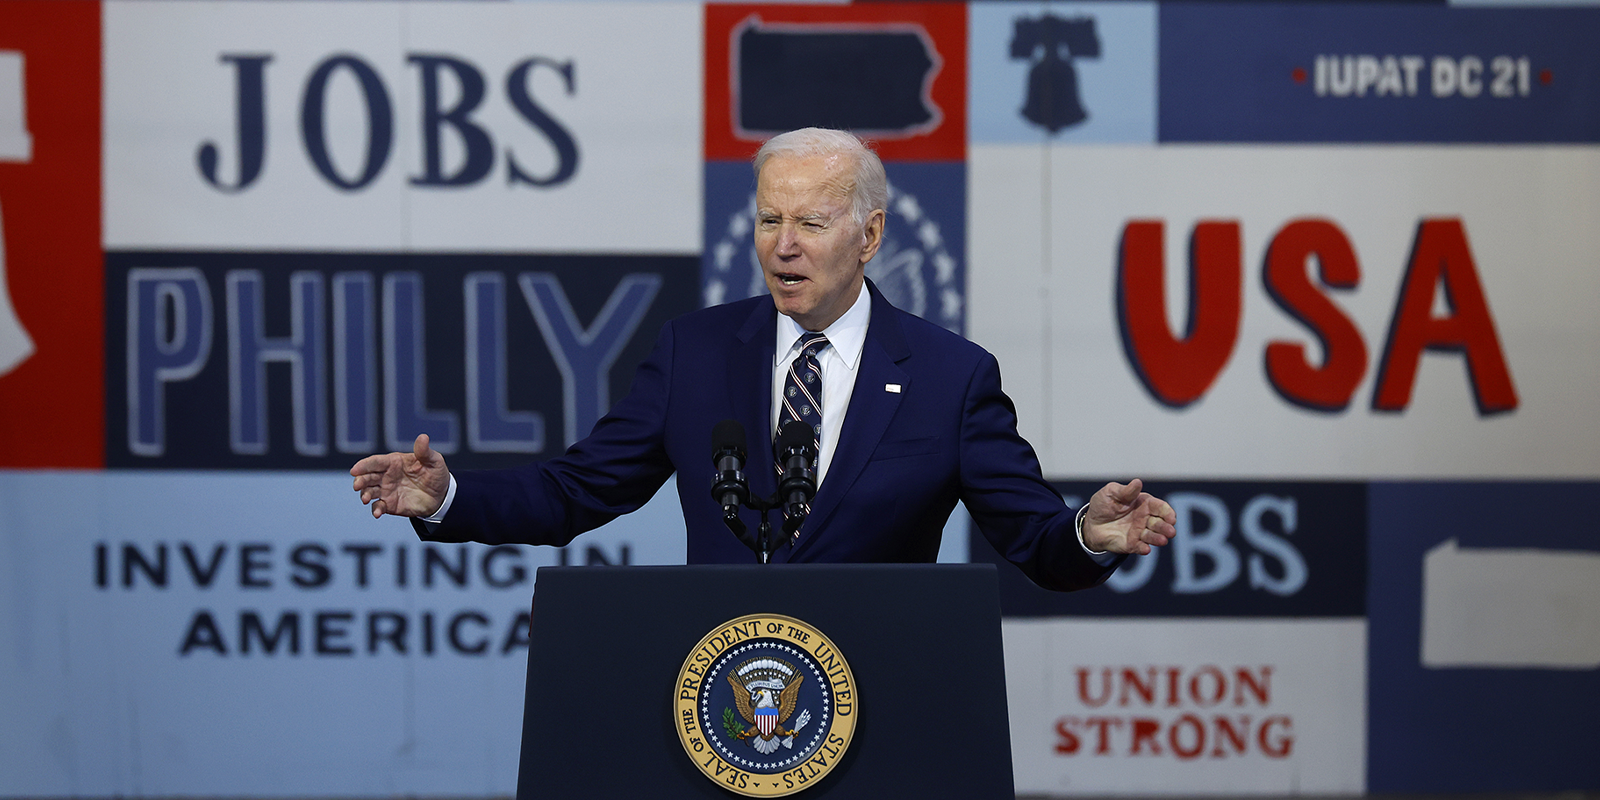 AFSCME president calls Biden’s budget ‘a bold plan to invest in working families’